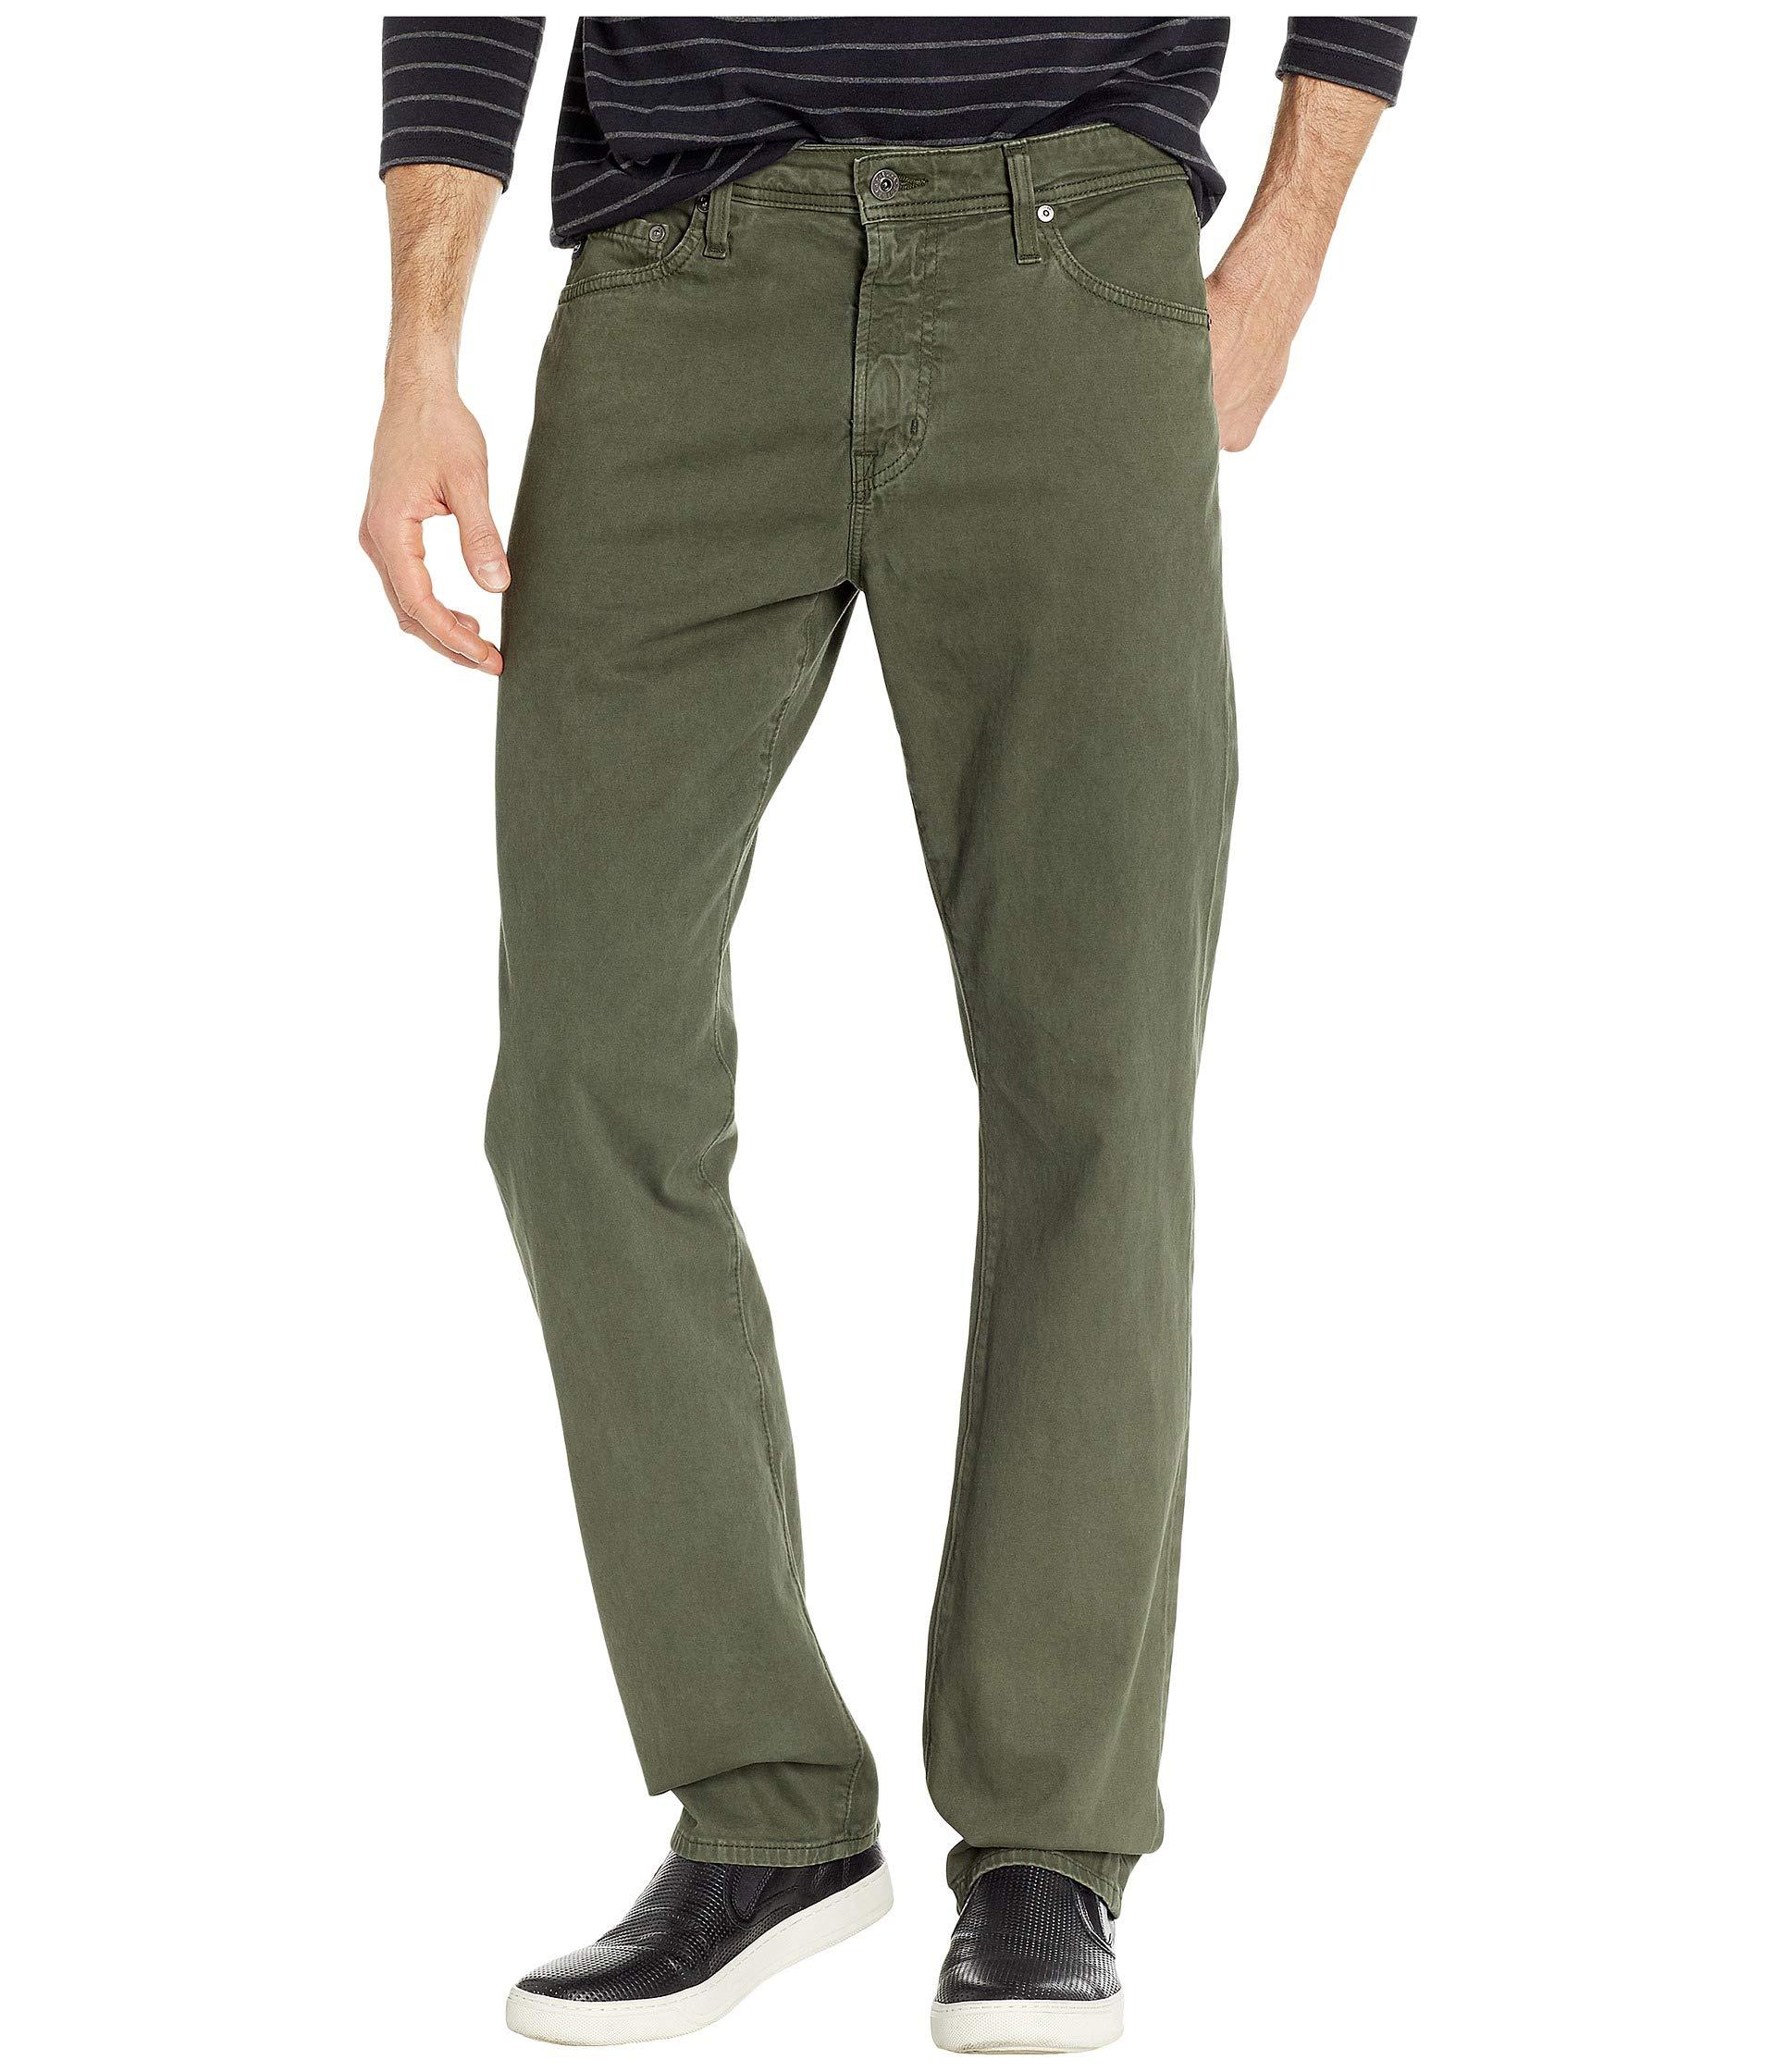 AG Adriano Goldschmied Mens The Everett Slim Straight Sud Pant